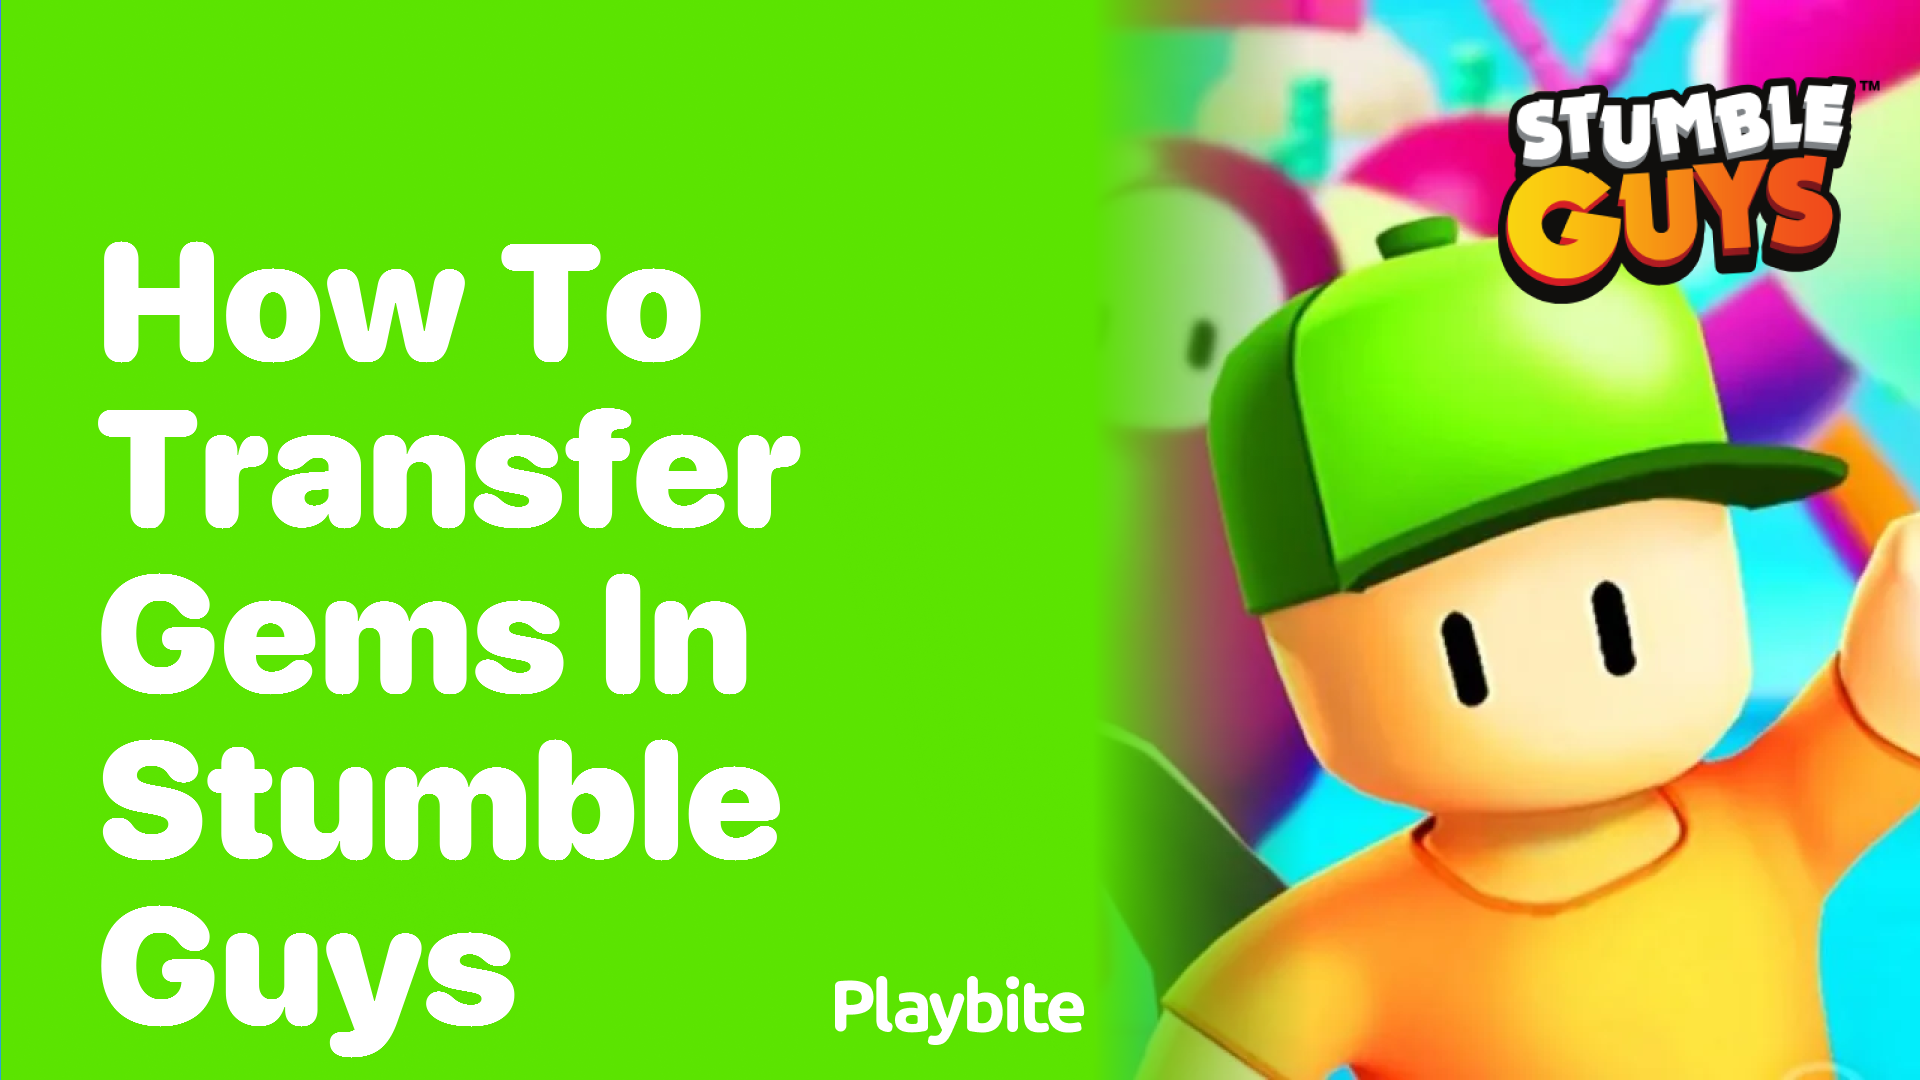 How to Transfer Gems in Stumble Guys?